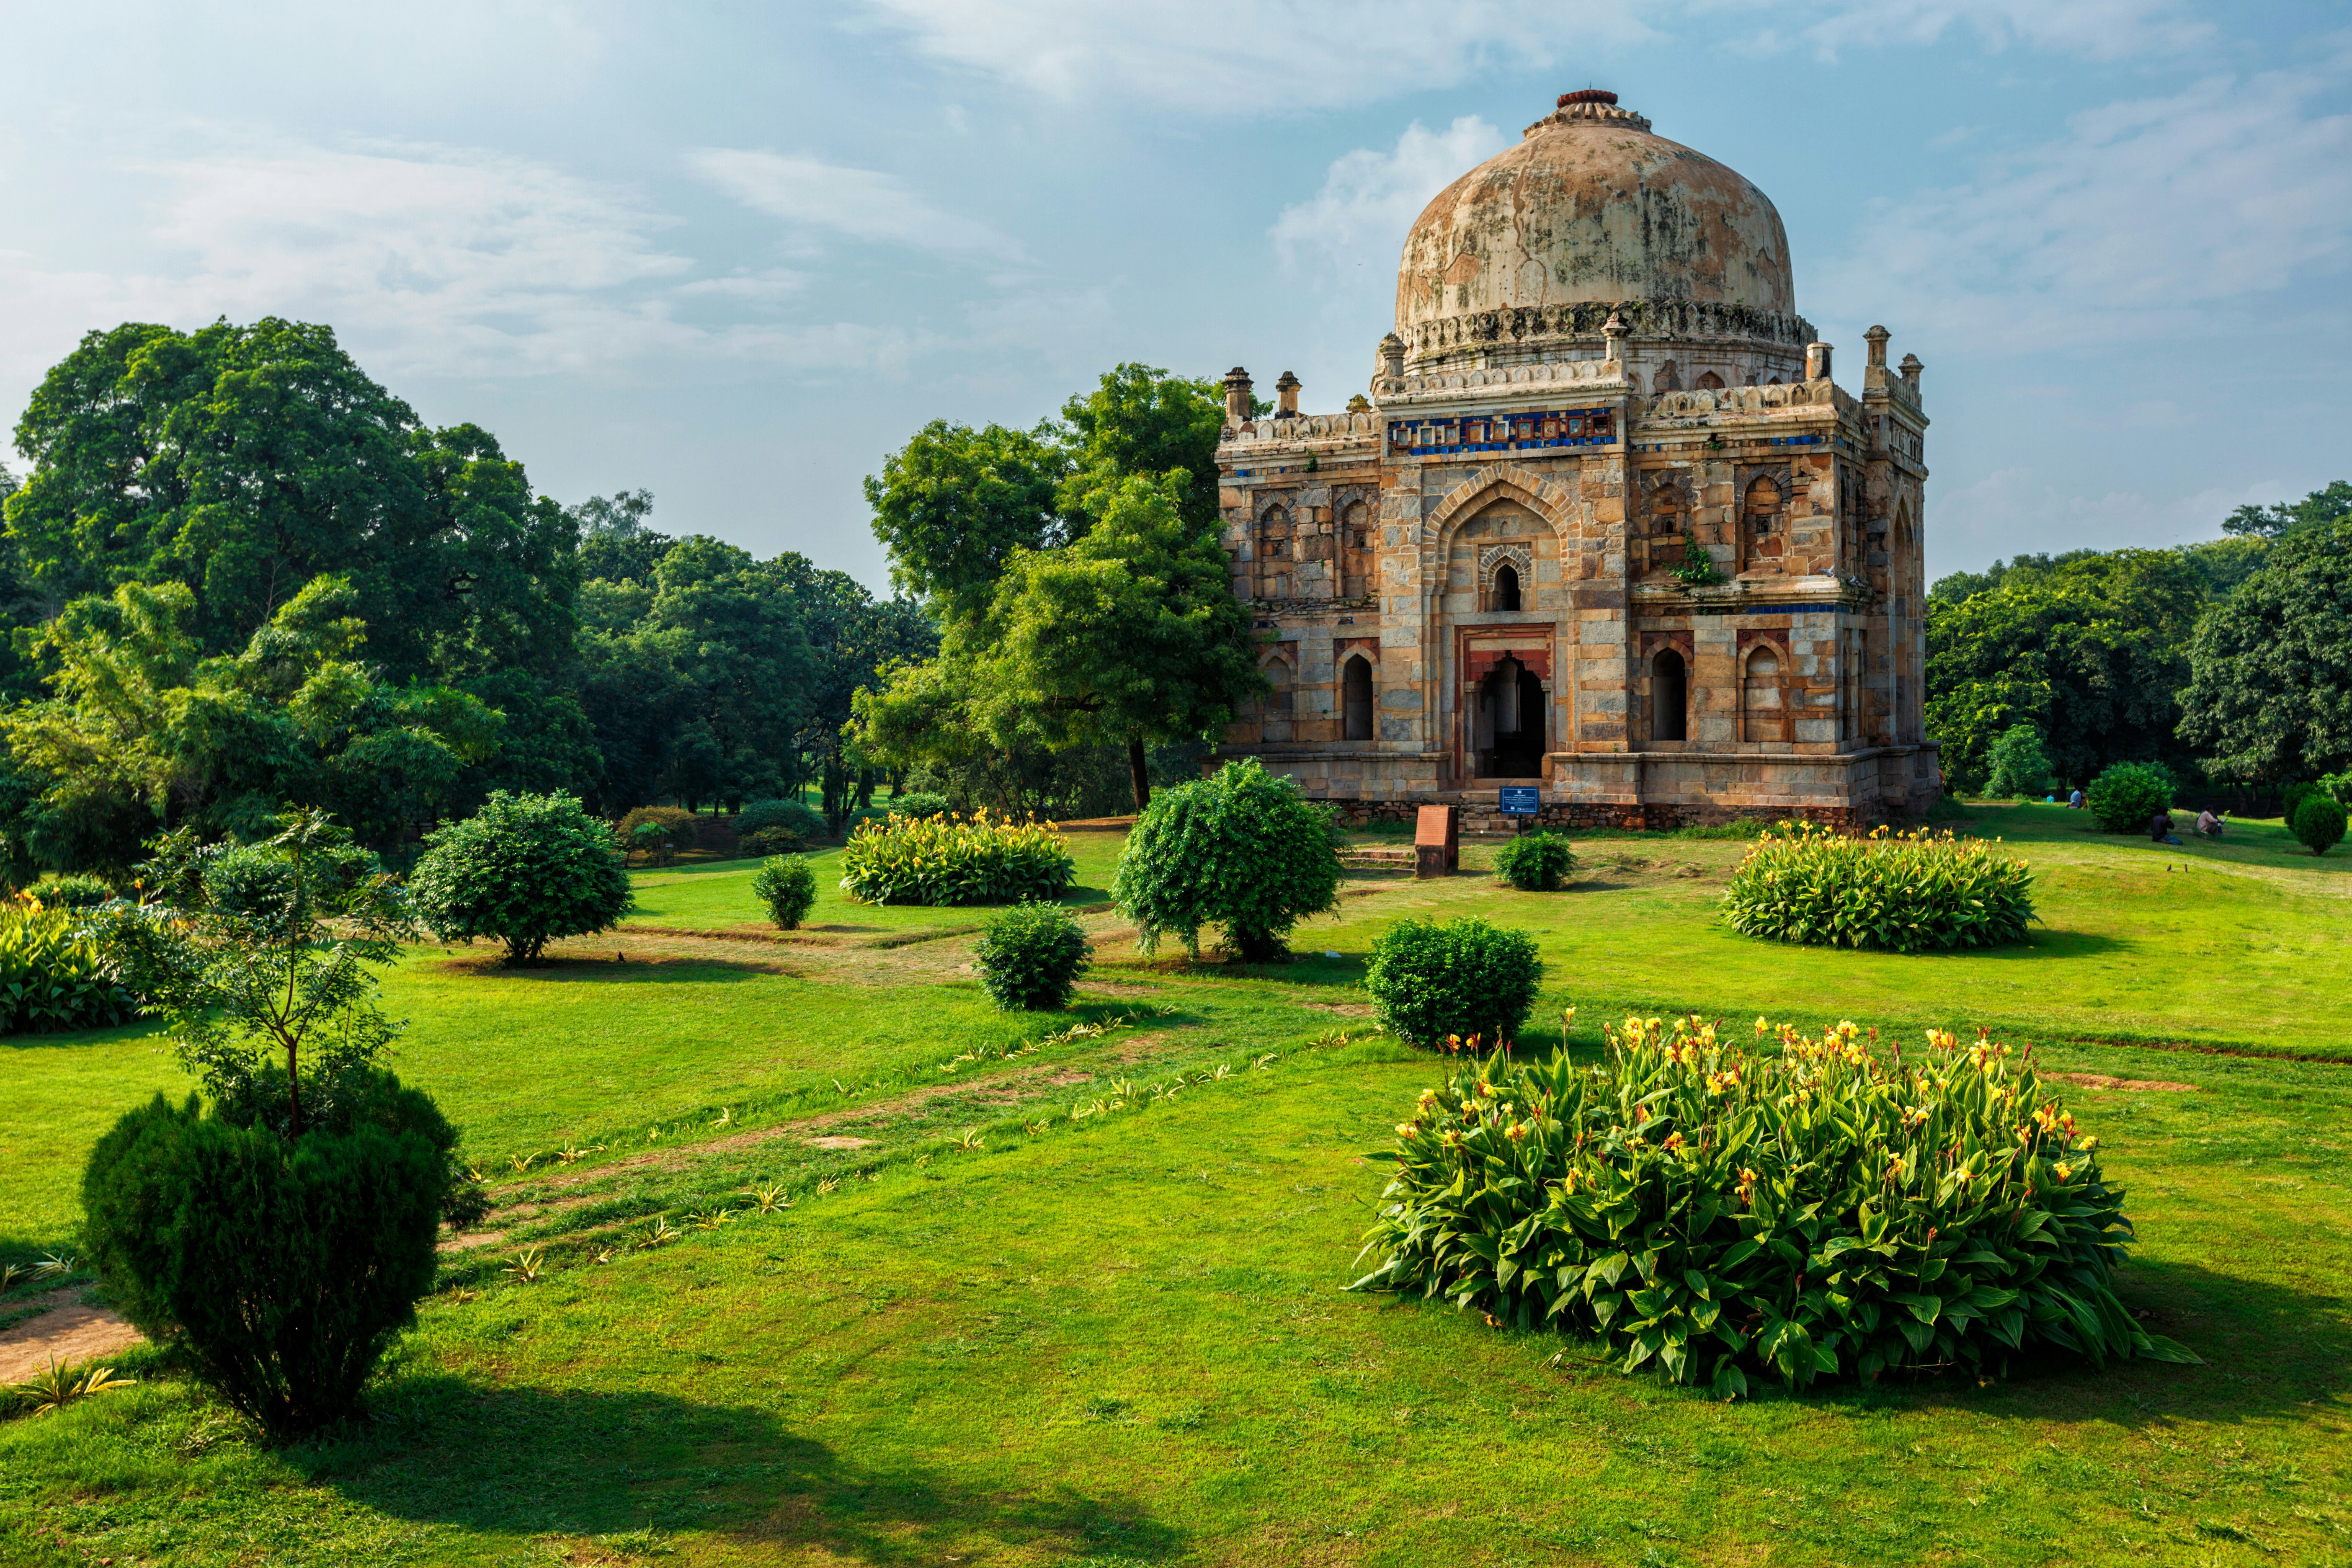 Lush garden and historic dome-shaped building under clear blue sky in Delhi.